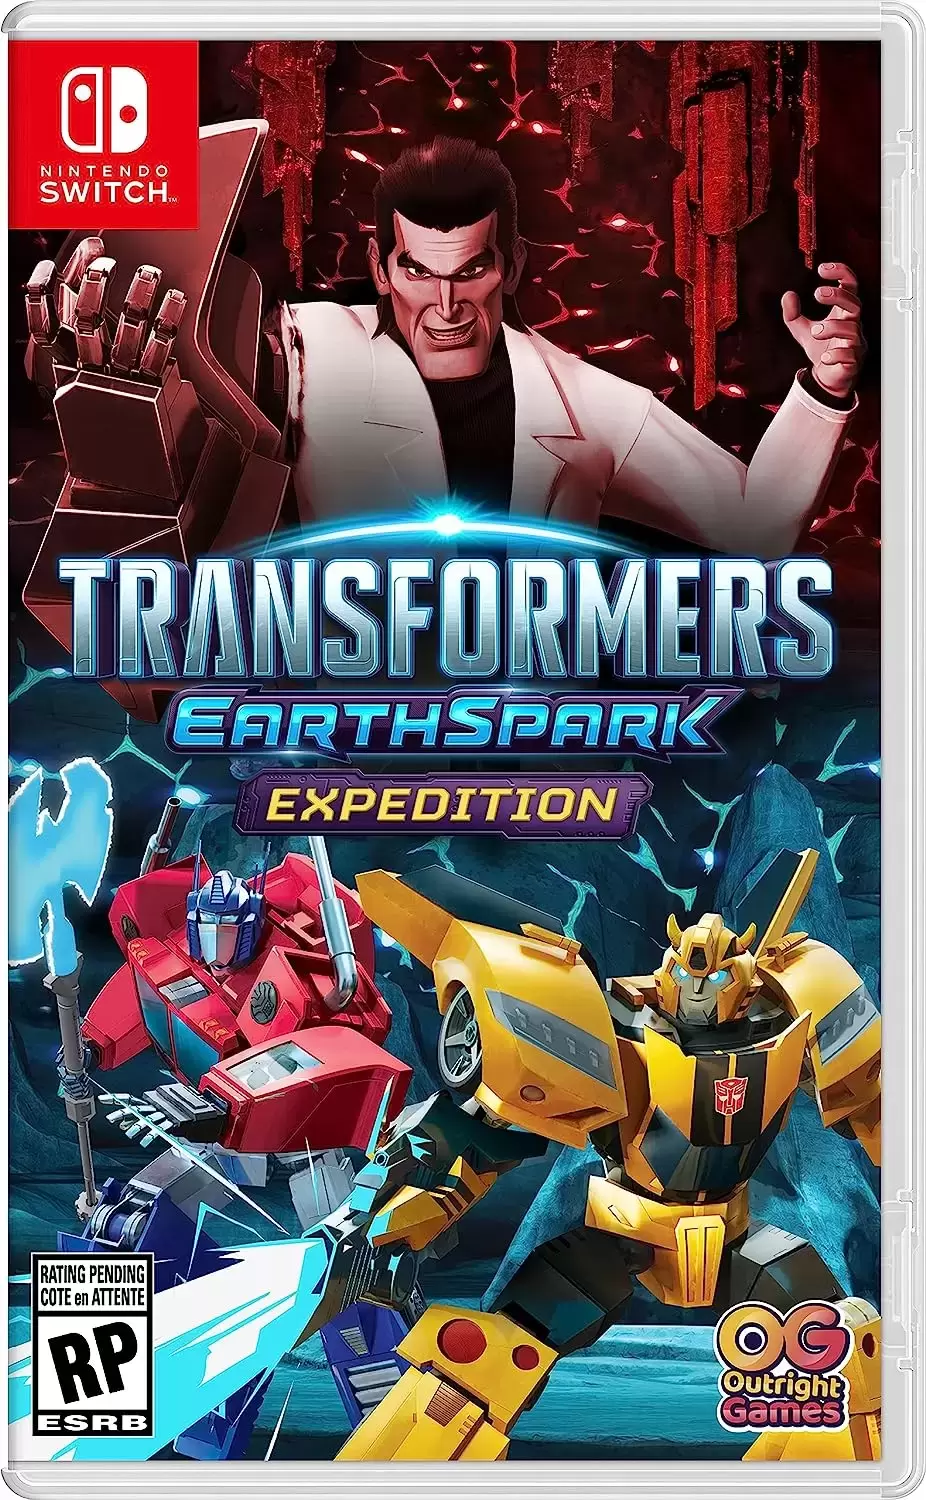 Nintendo Switch Games - Transformers Earthspark Expedition